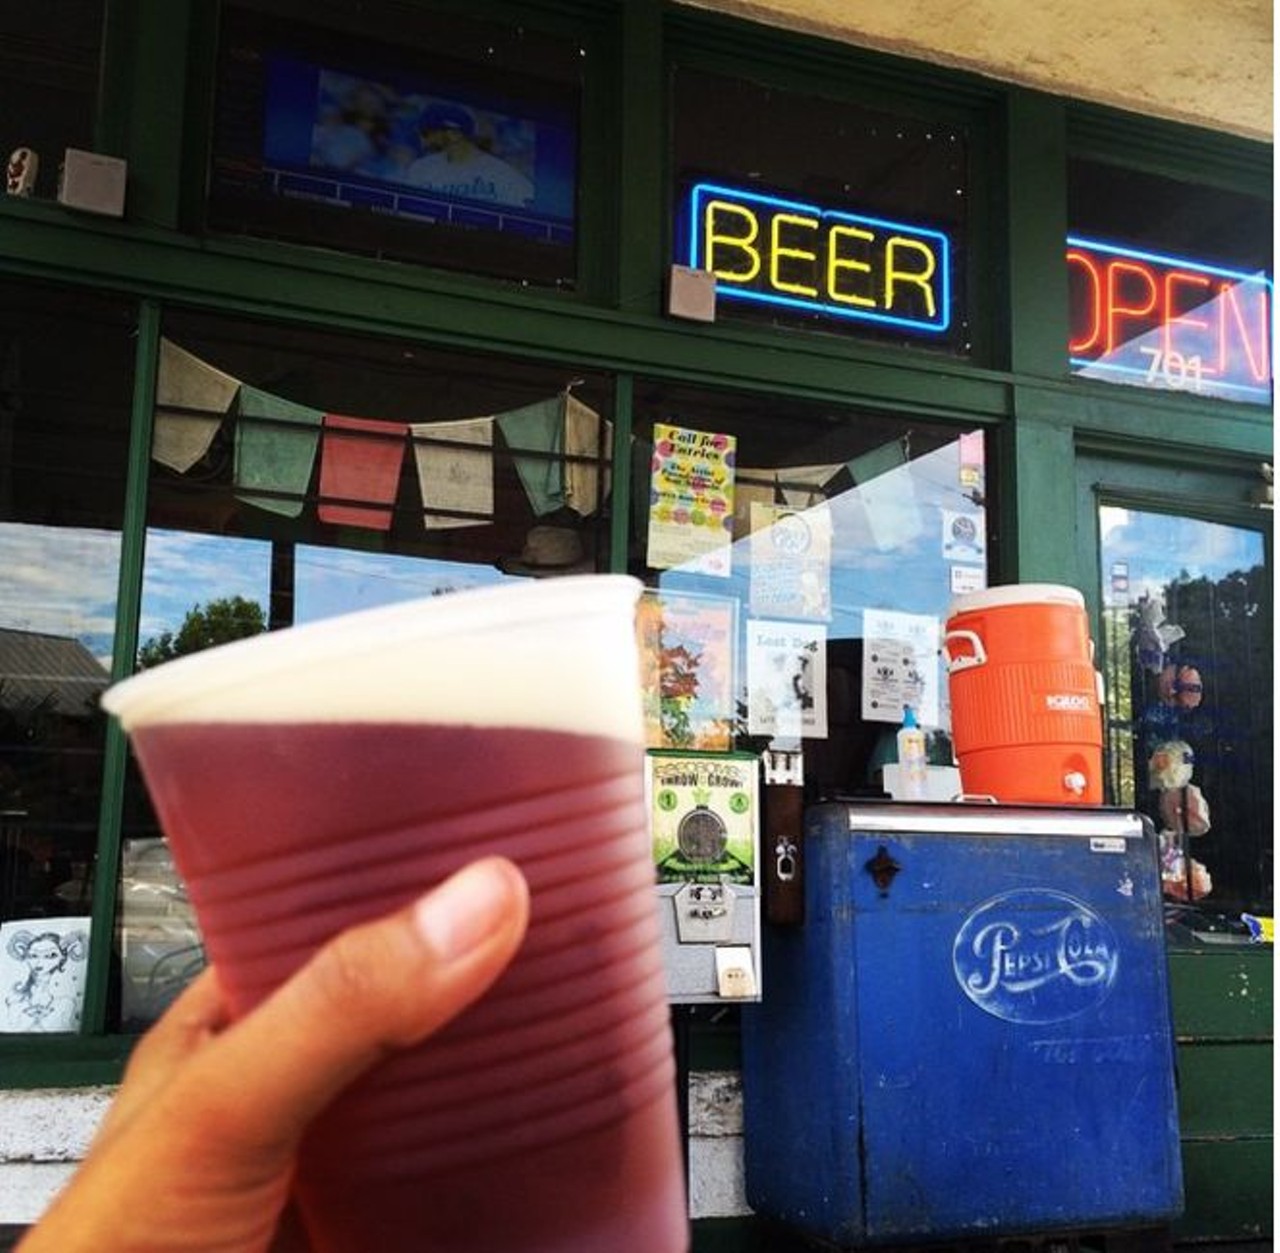 The Filling Station Tap Room
701 S. St. Mary&#146;s St., (210) 444-2200, facebook.com/stationtaproom
Bold beers are poured at this tiny joint that used to house the Station Cafe. Make yourself at home on the patio. 
Photo via Instagram,  aliinunderland